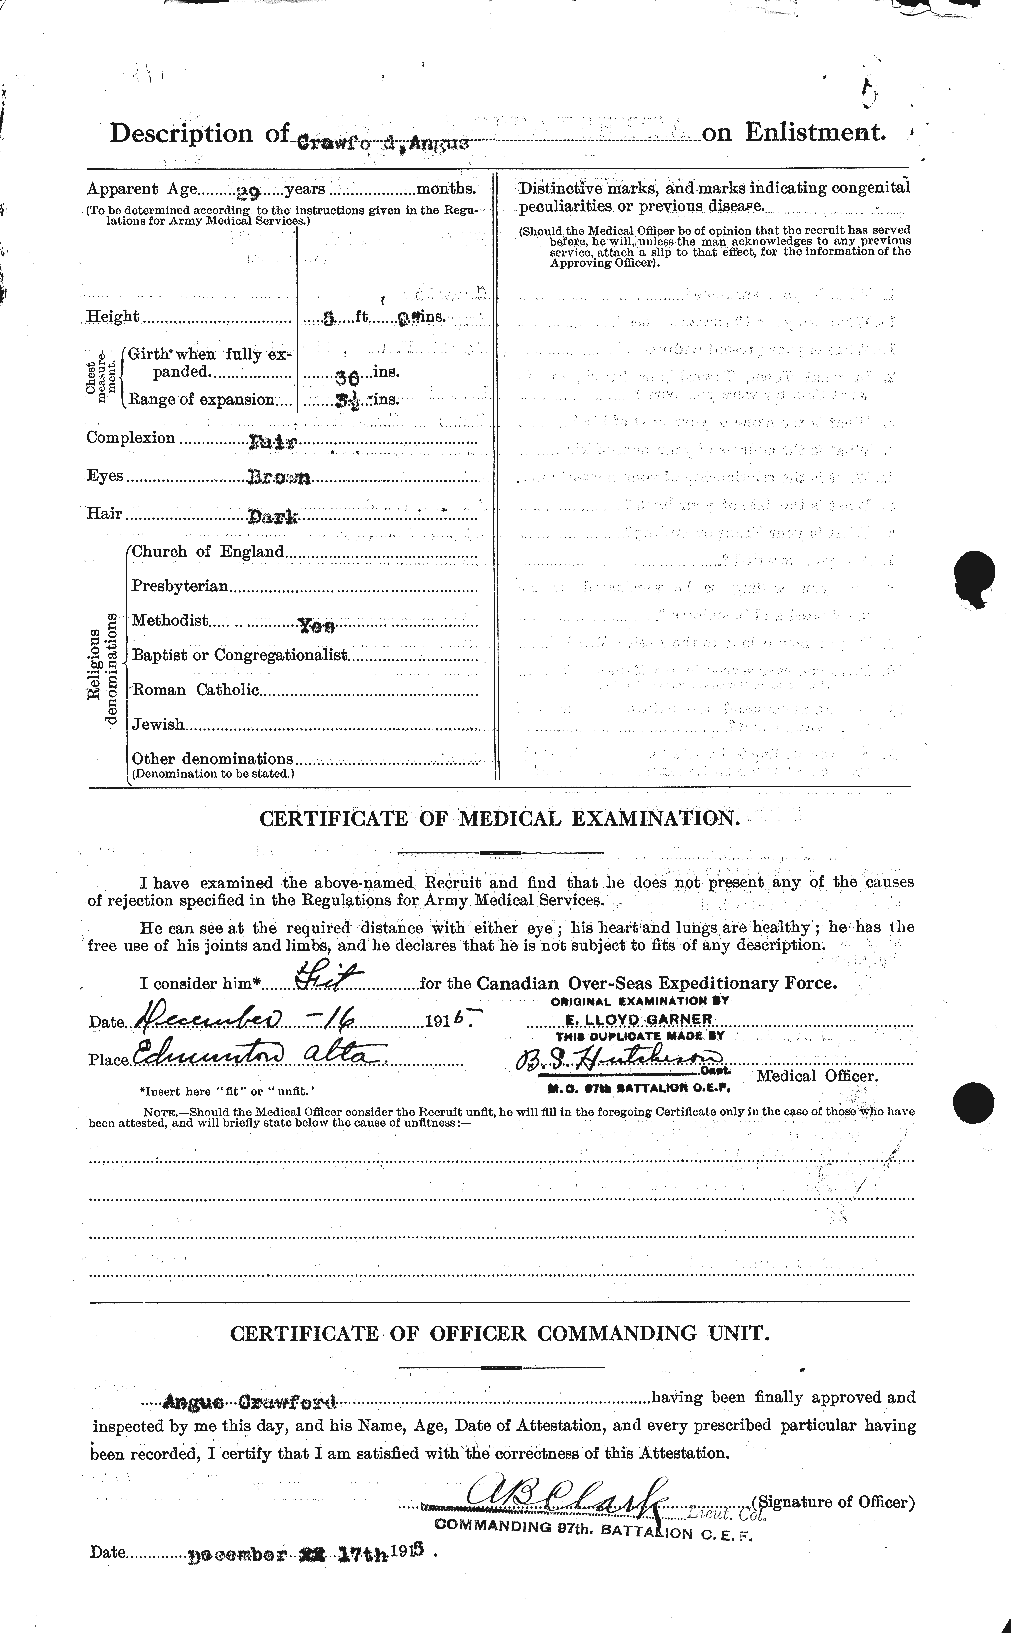 Personnel Records of the First World War - CEF 060942b